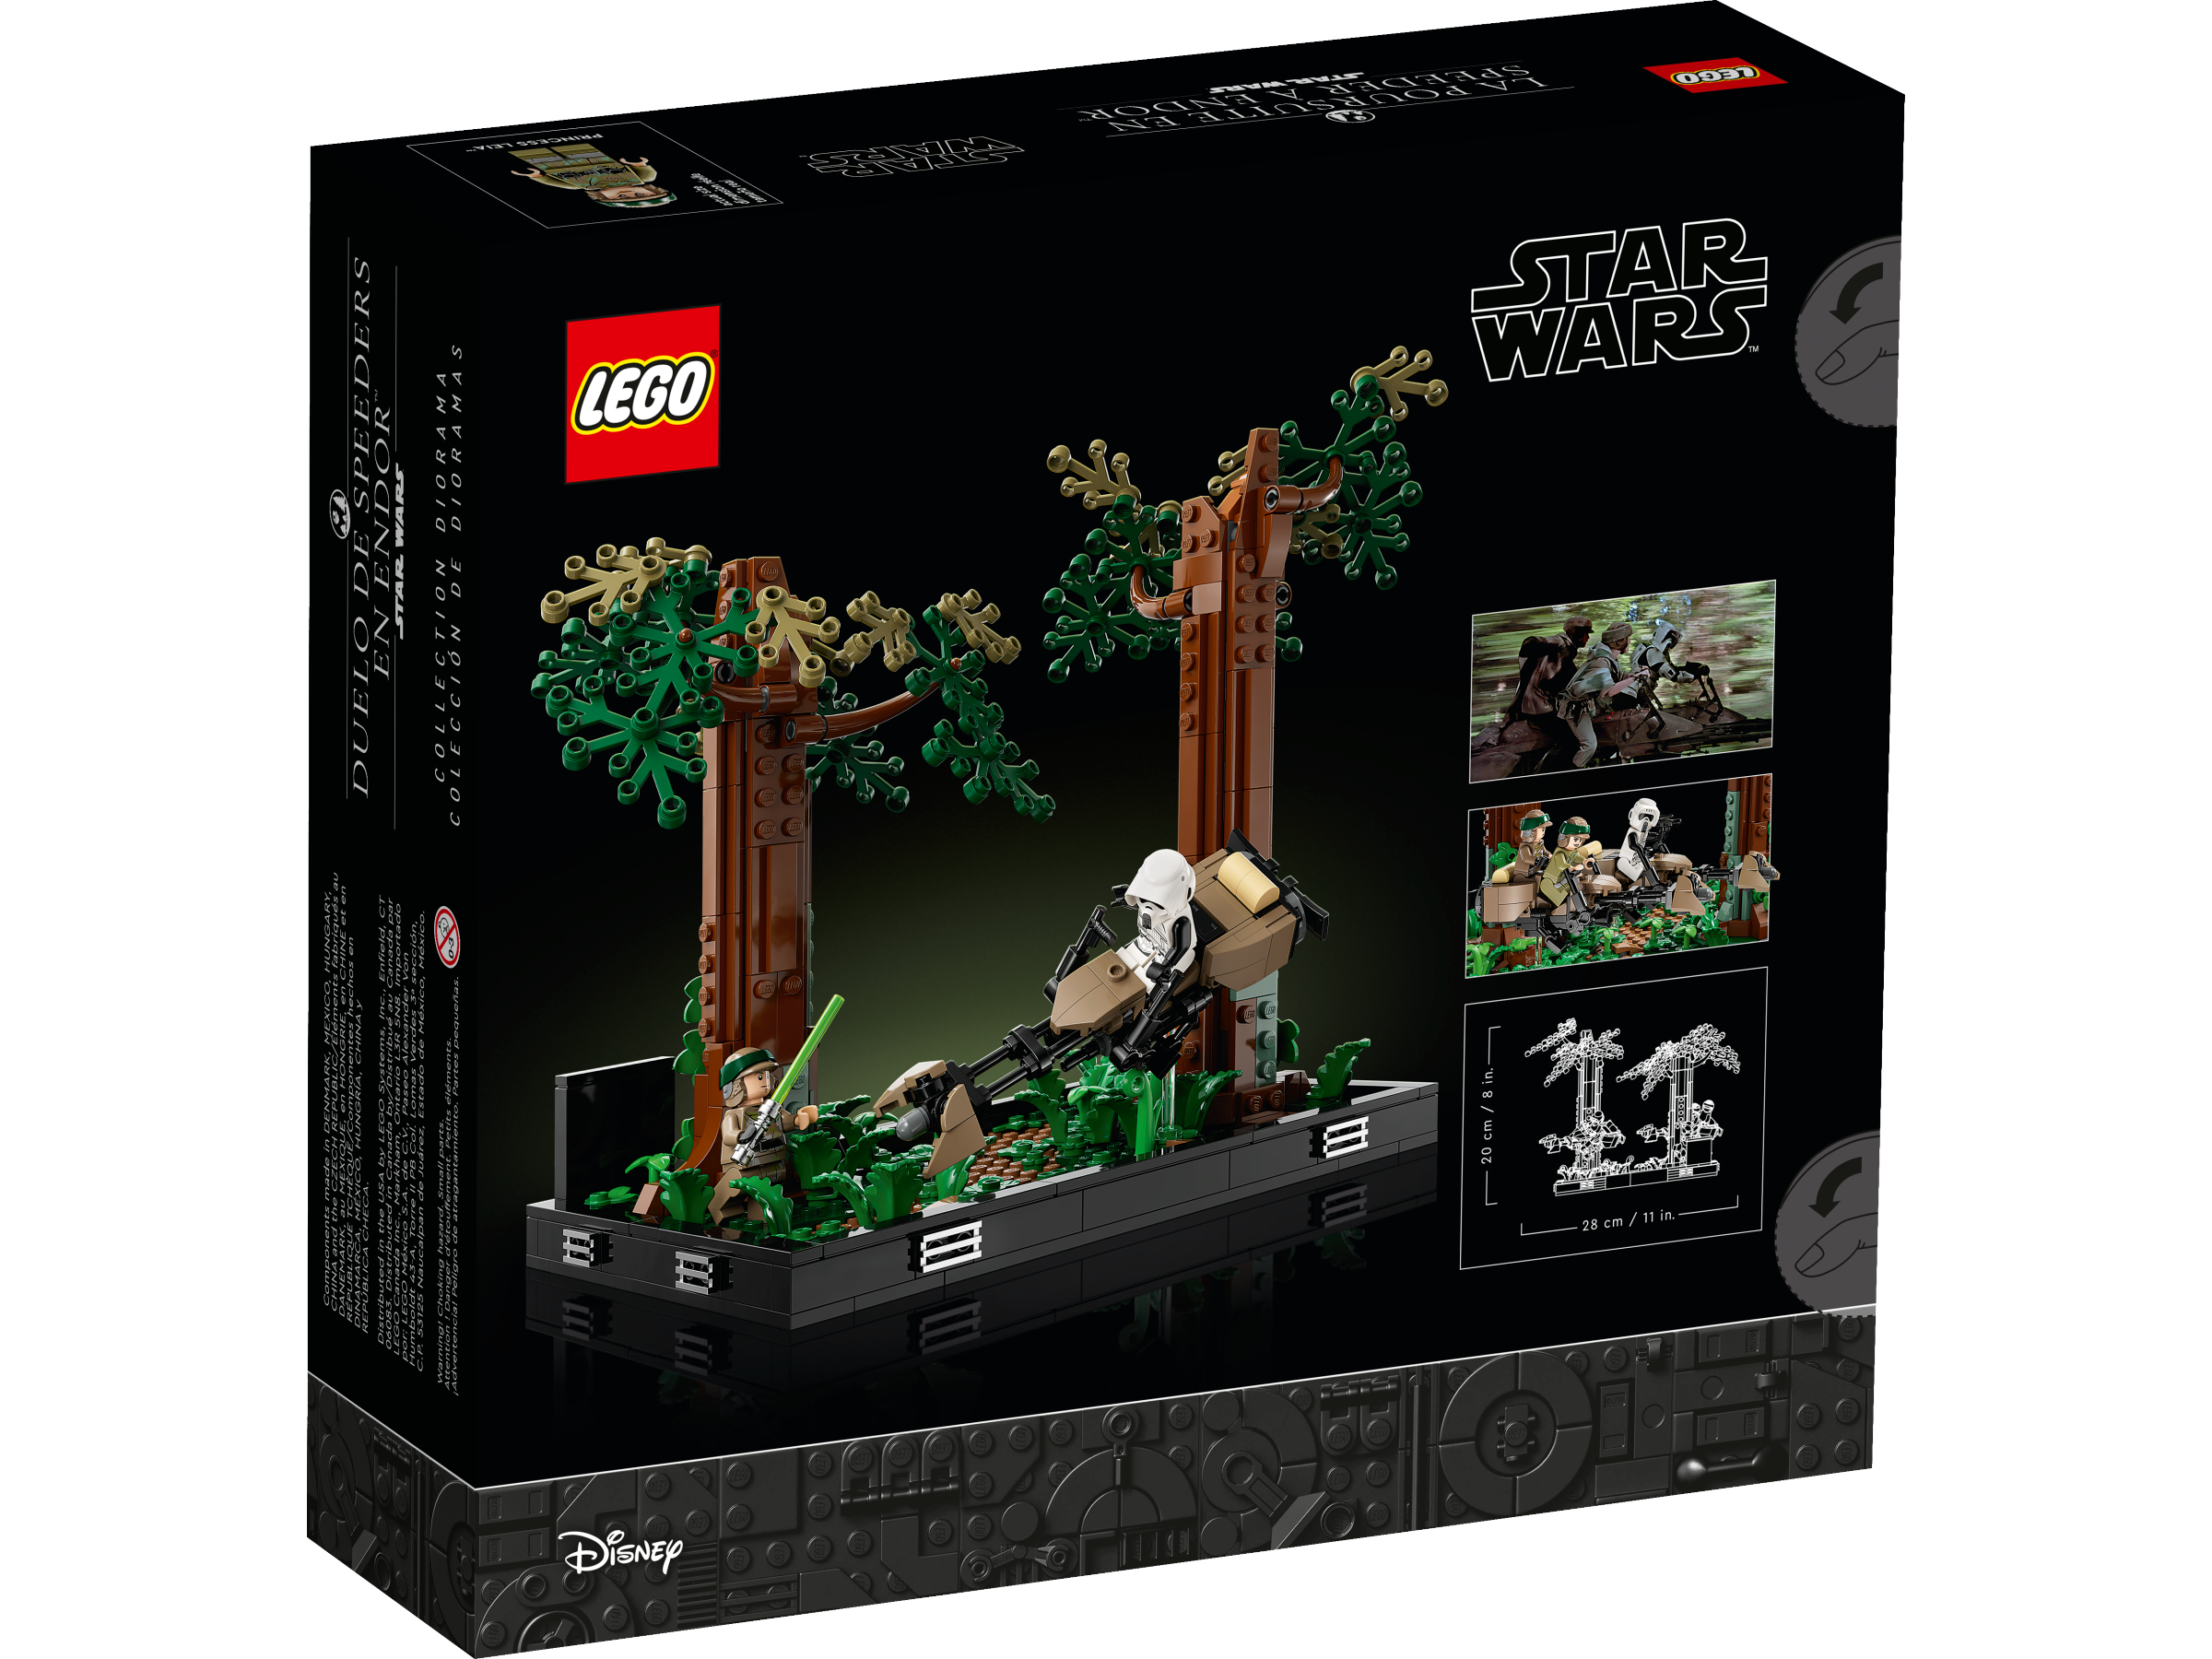 Endor™ Speeder Chase Diorama 75353 | Star Wars™ | Buy online at the  Official LEGO® Shop US